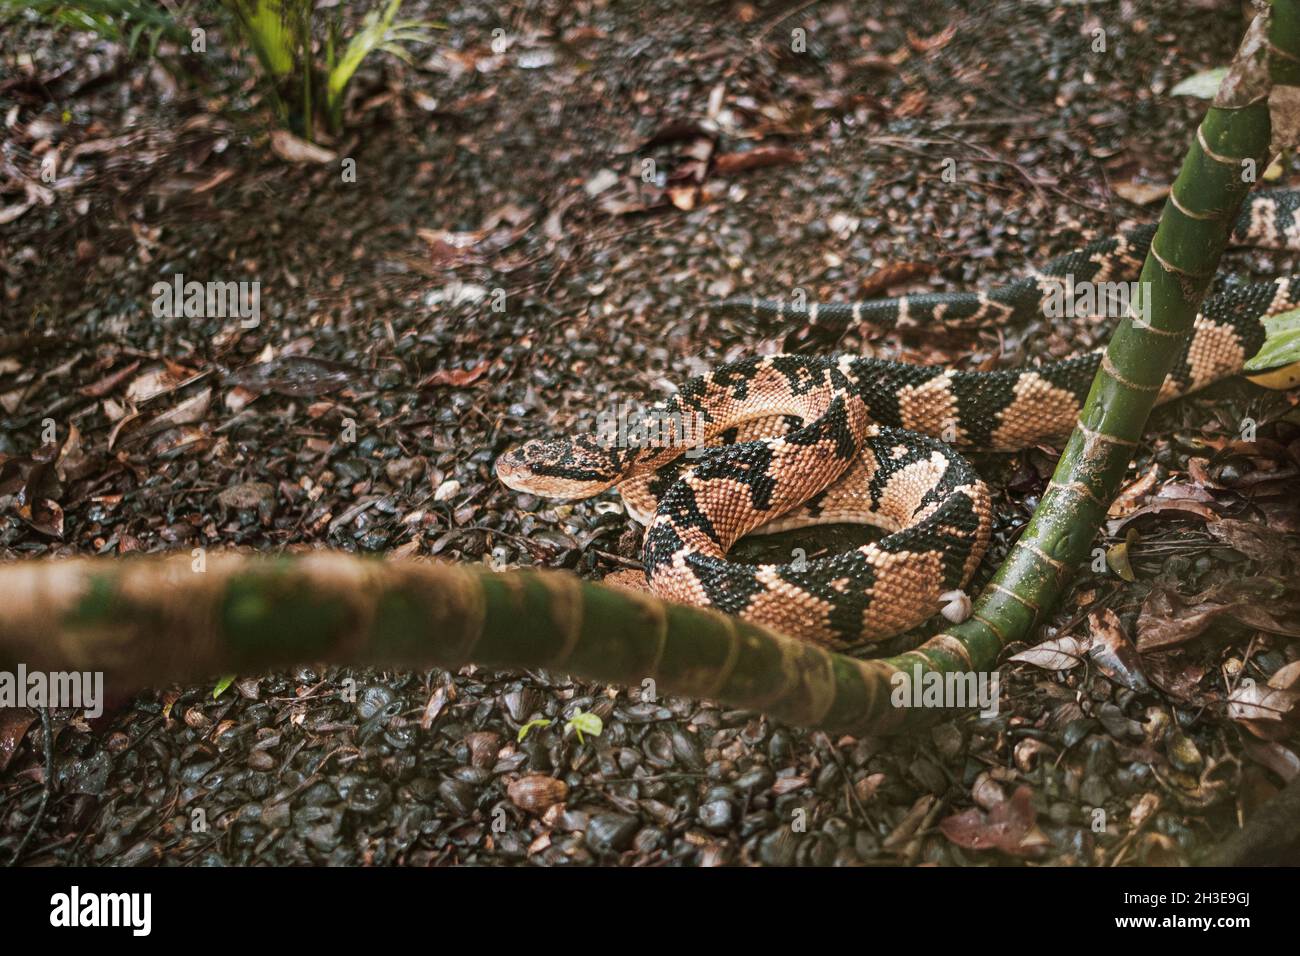 From above of dangerous venomous Lachesis muta snake crawling on ground in natural habitat Stock Photo